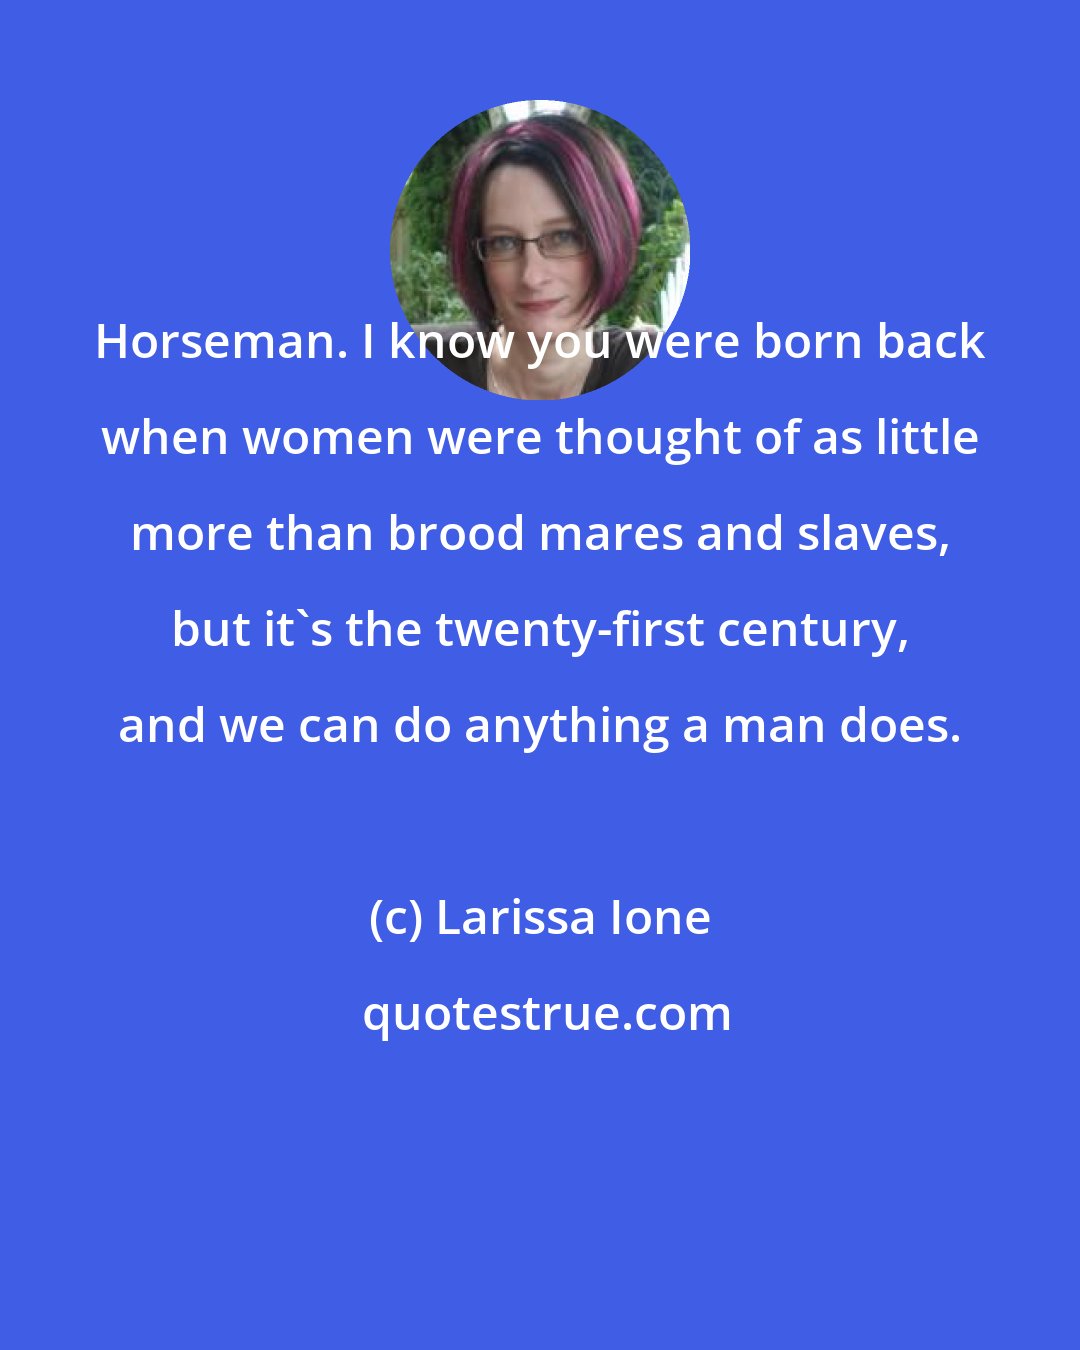 Larissa Ione: Horseman. I know you were born back when women were thought of as little more than brood mares and slaves, but it's the twenty-first century, and we can do anything a man does.